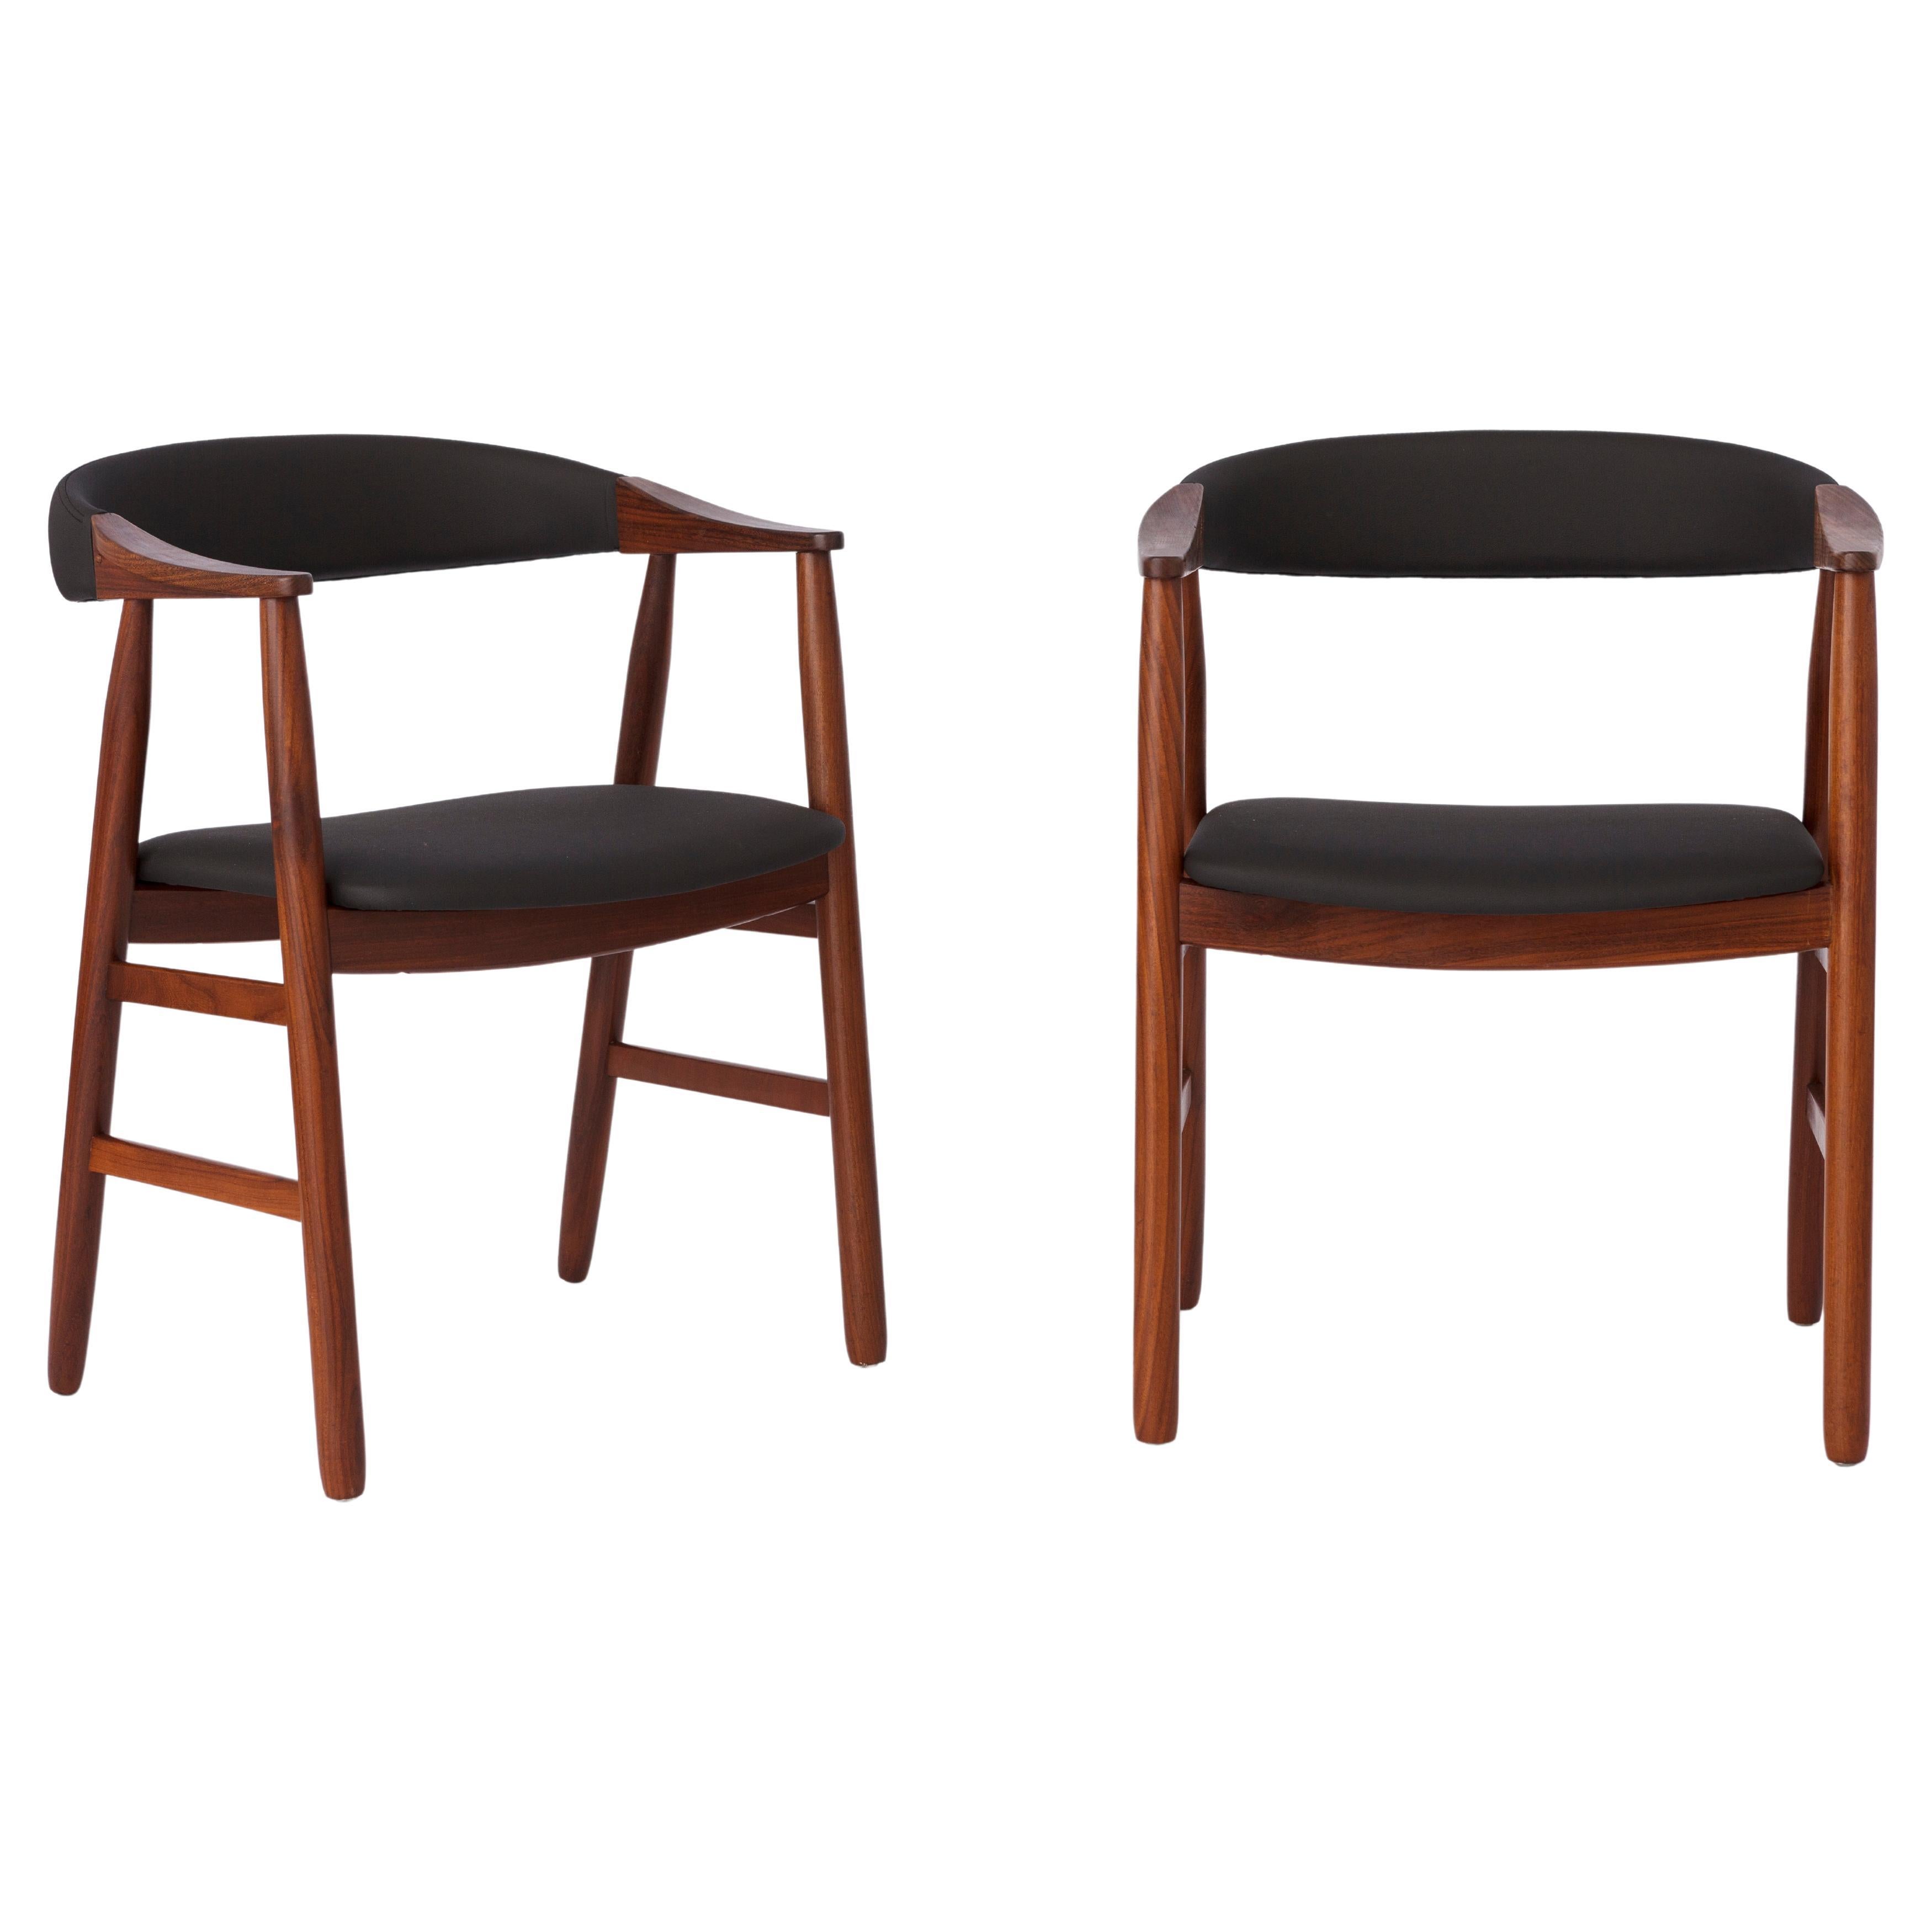 2 Vintage Chairs by Thomas Harlev, Model 213, Danish, for Farstrup, Teak, 1960s. For Sale